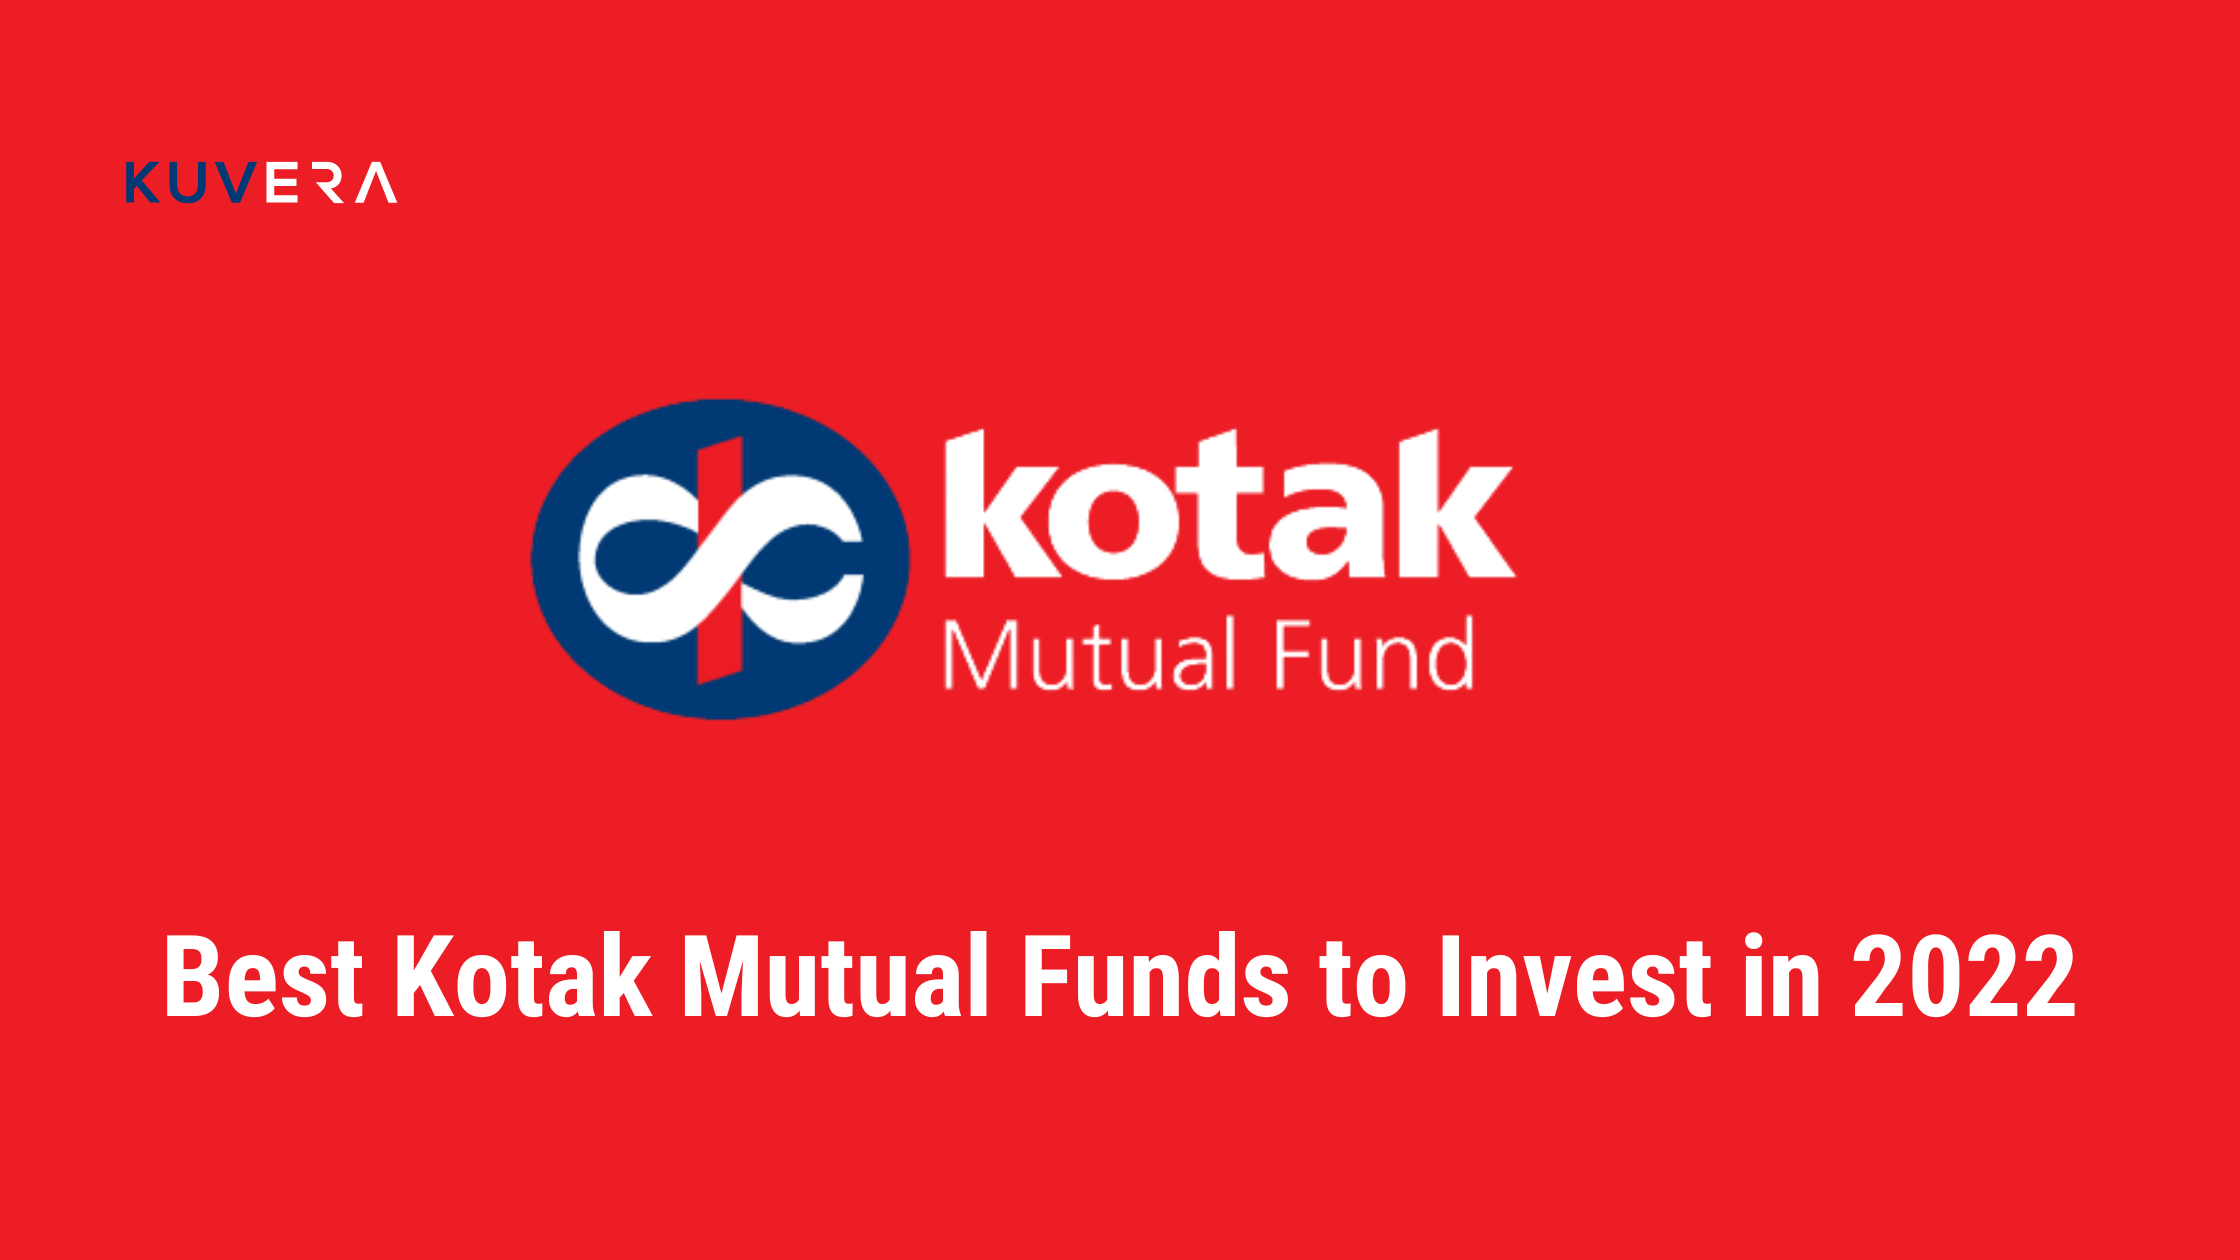 Best Kotak Mutual Funds To Invest in India 2022 Kuvera